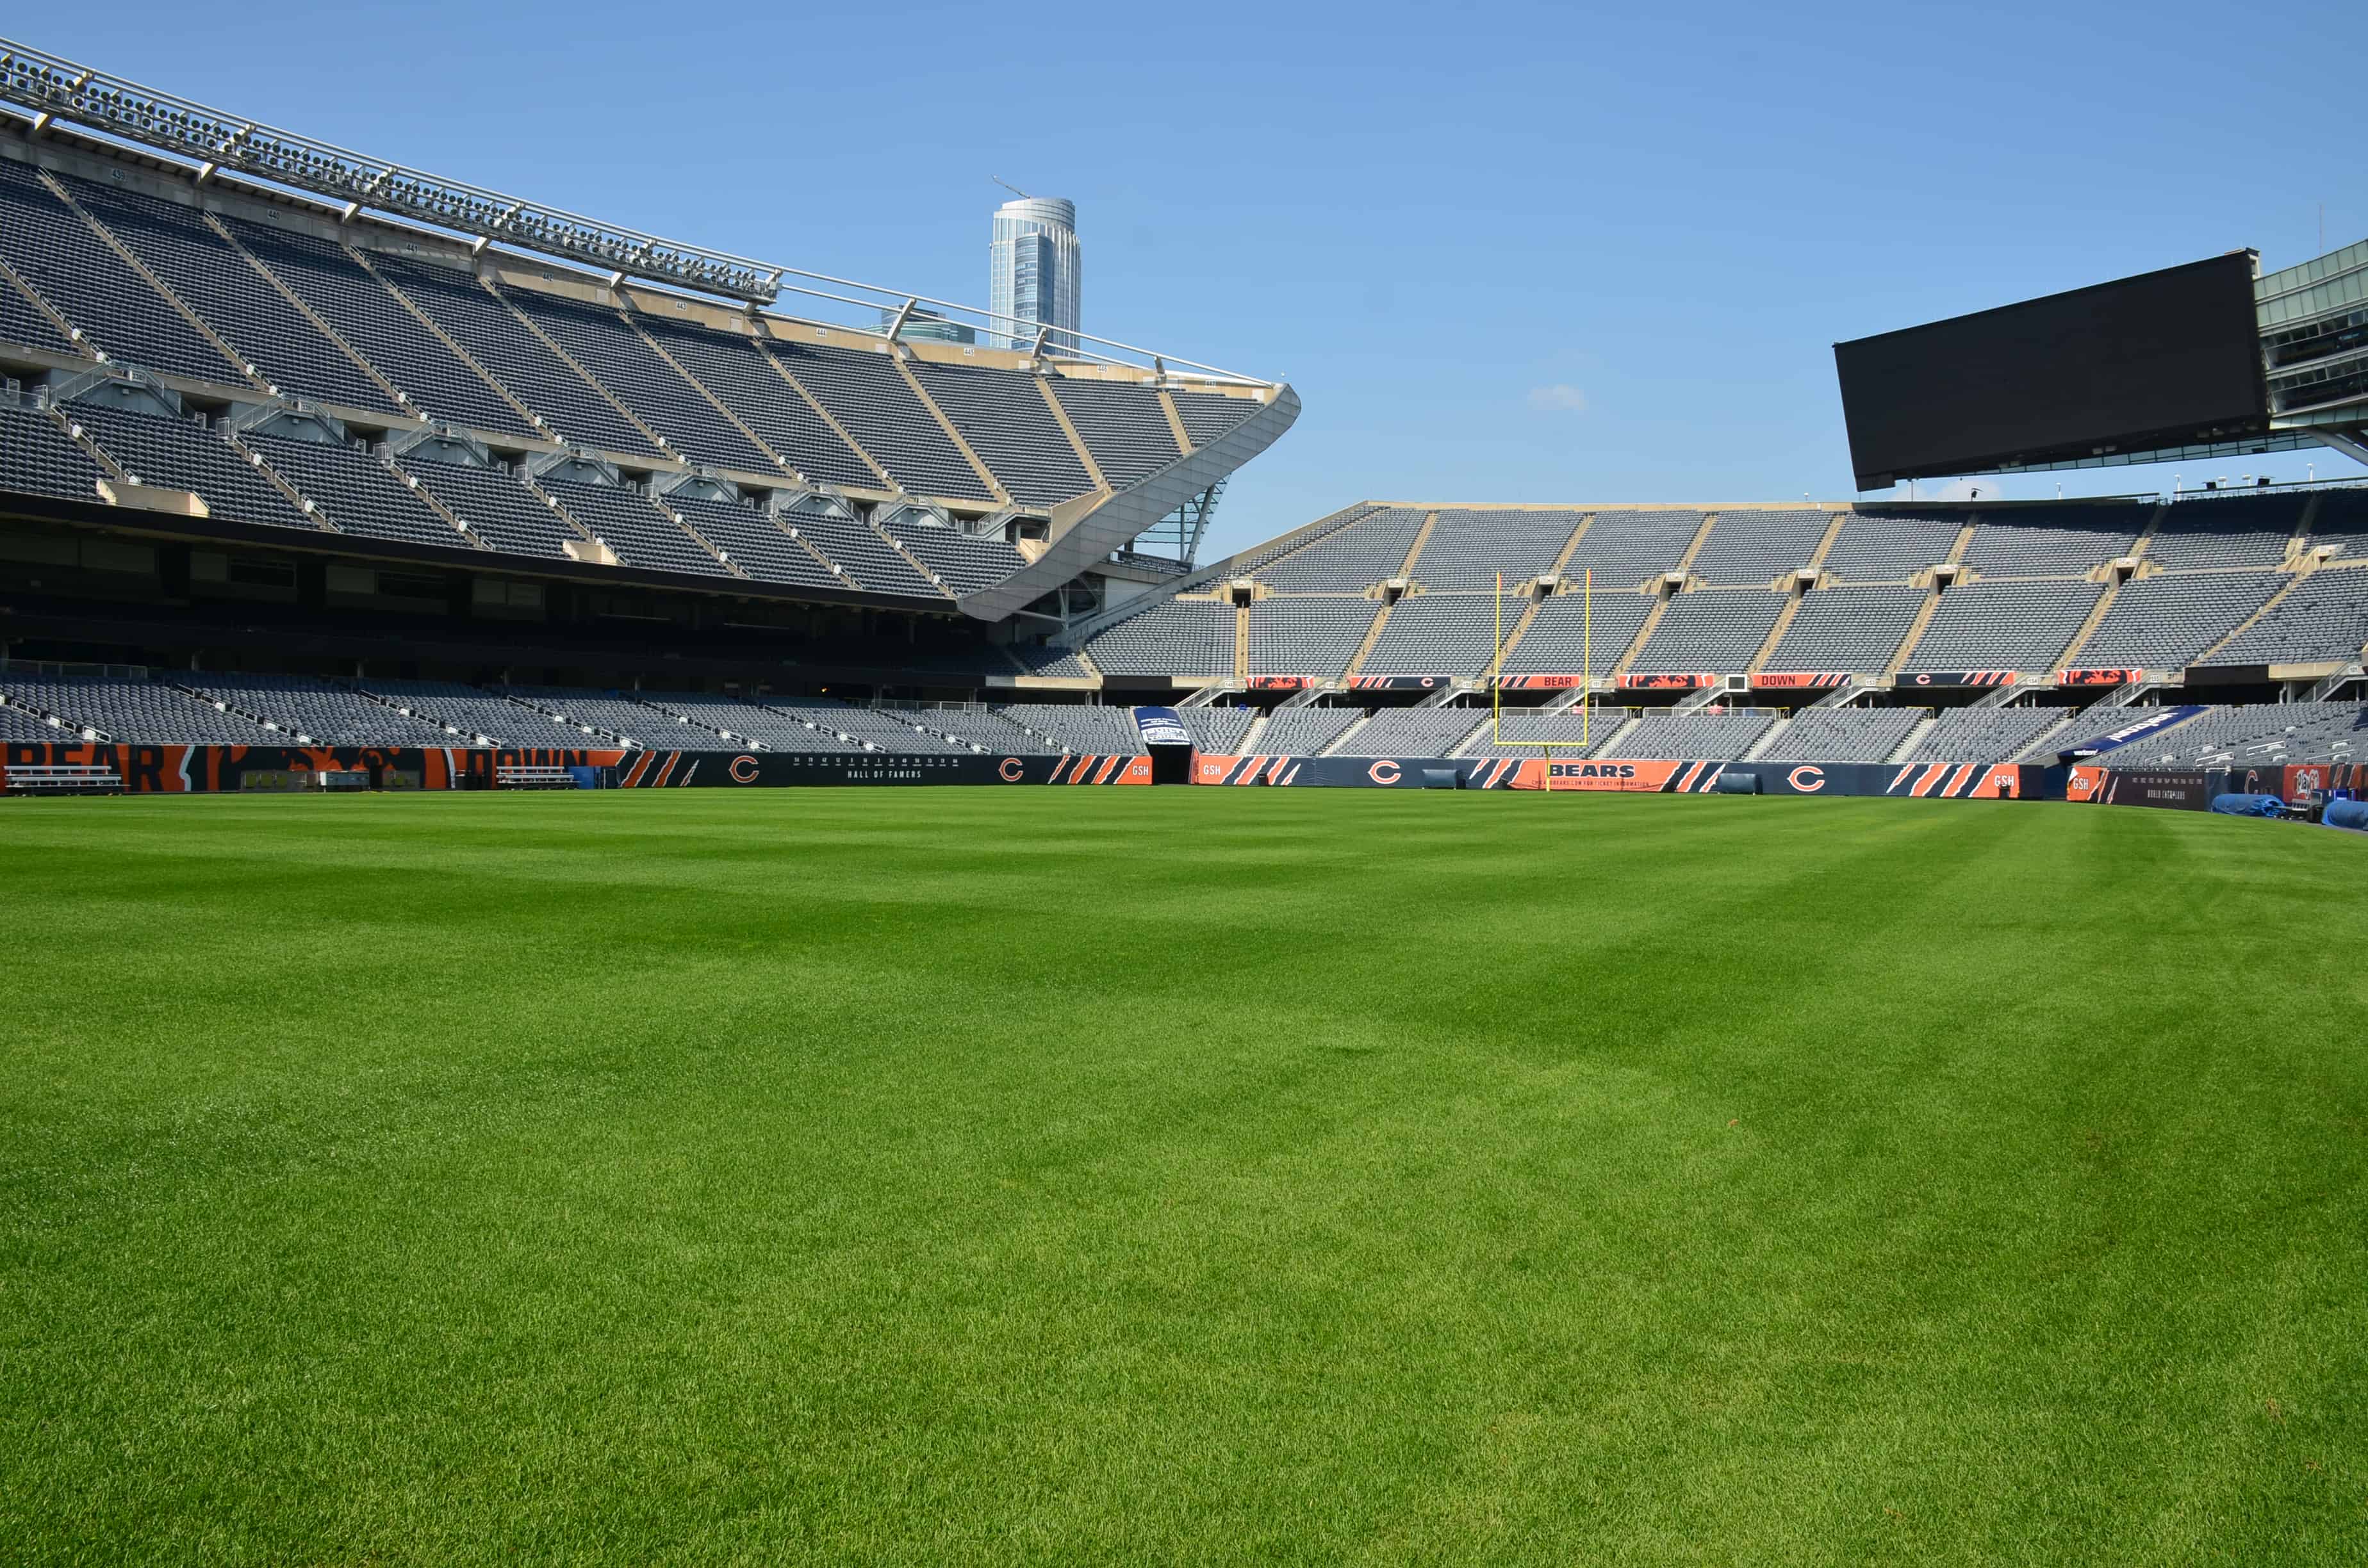 On the field at Soldier Field in Chicago, Illinois